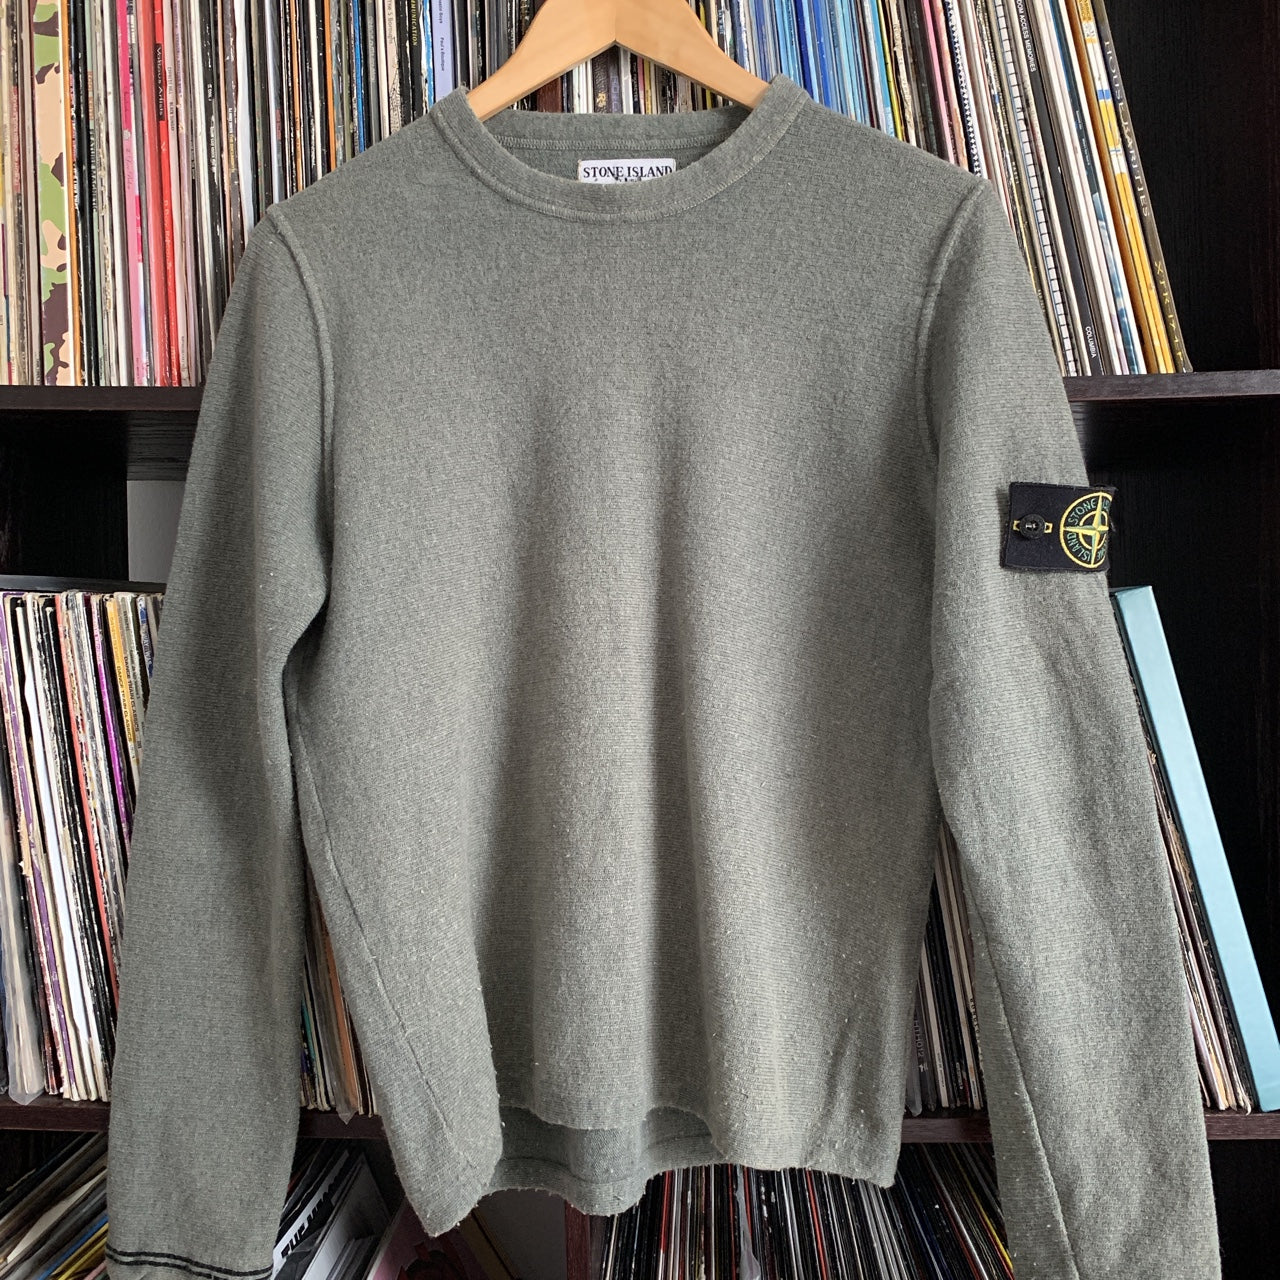 Stone Island Vintage Sweater Size Large but actually will Fit Small to Medium